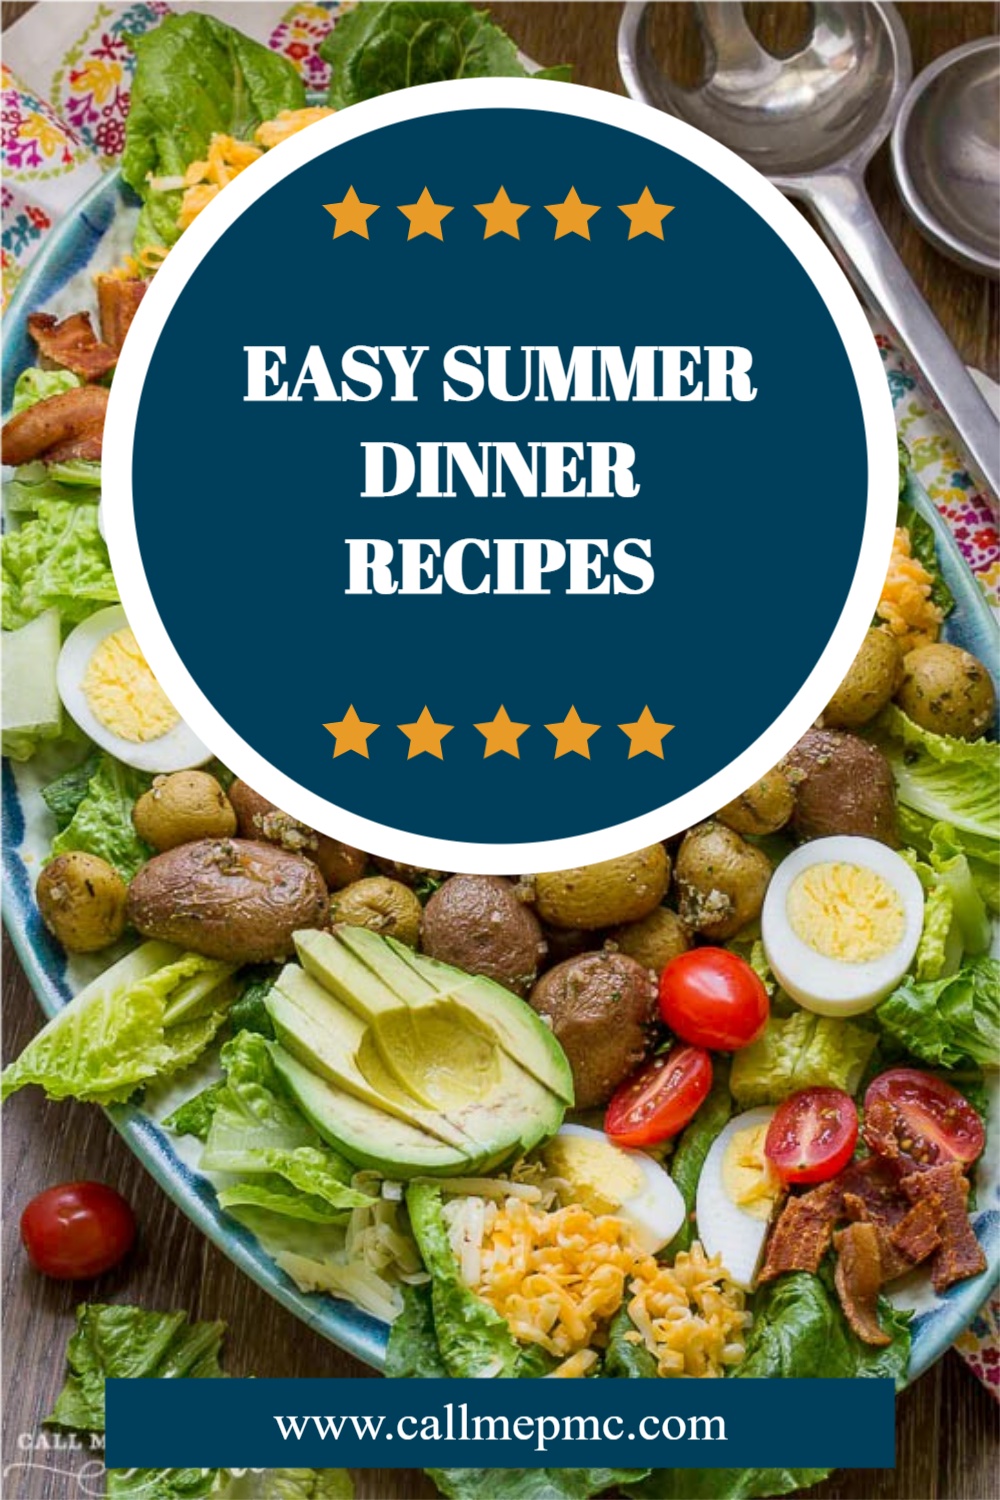 Easy Summer Dinner Recipes a collection of recipes that are quick, easy, delicious, & perfect for busy, hot summer weeknights.